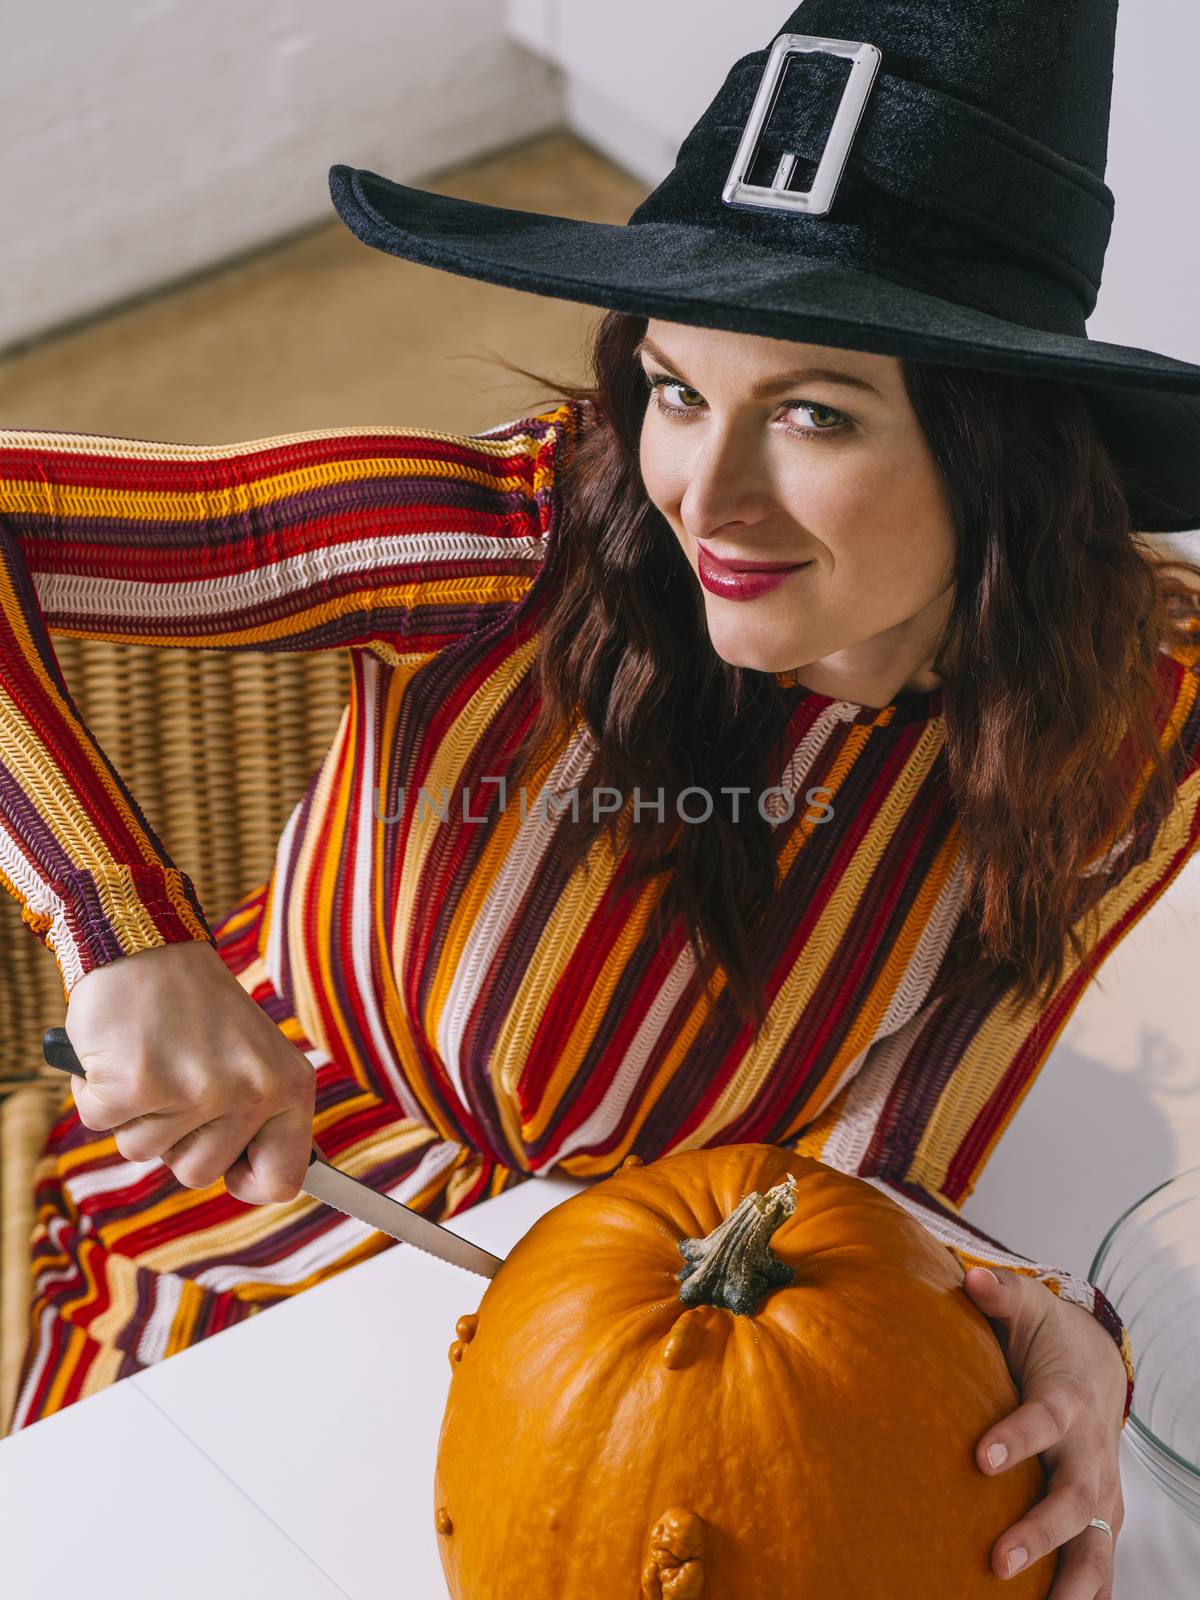 Beautiful woman cutting a pumpkin for Halloween by sumners